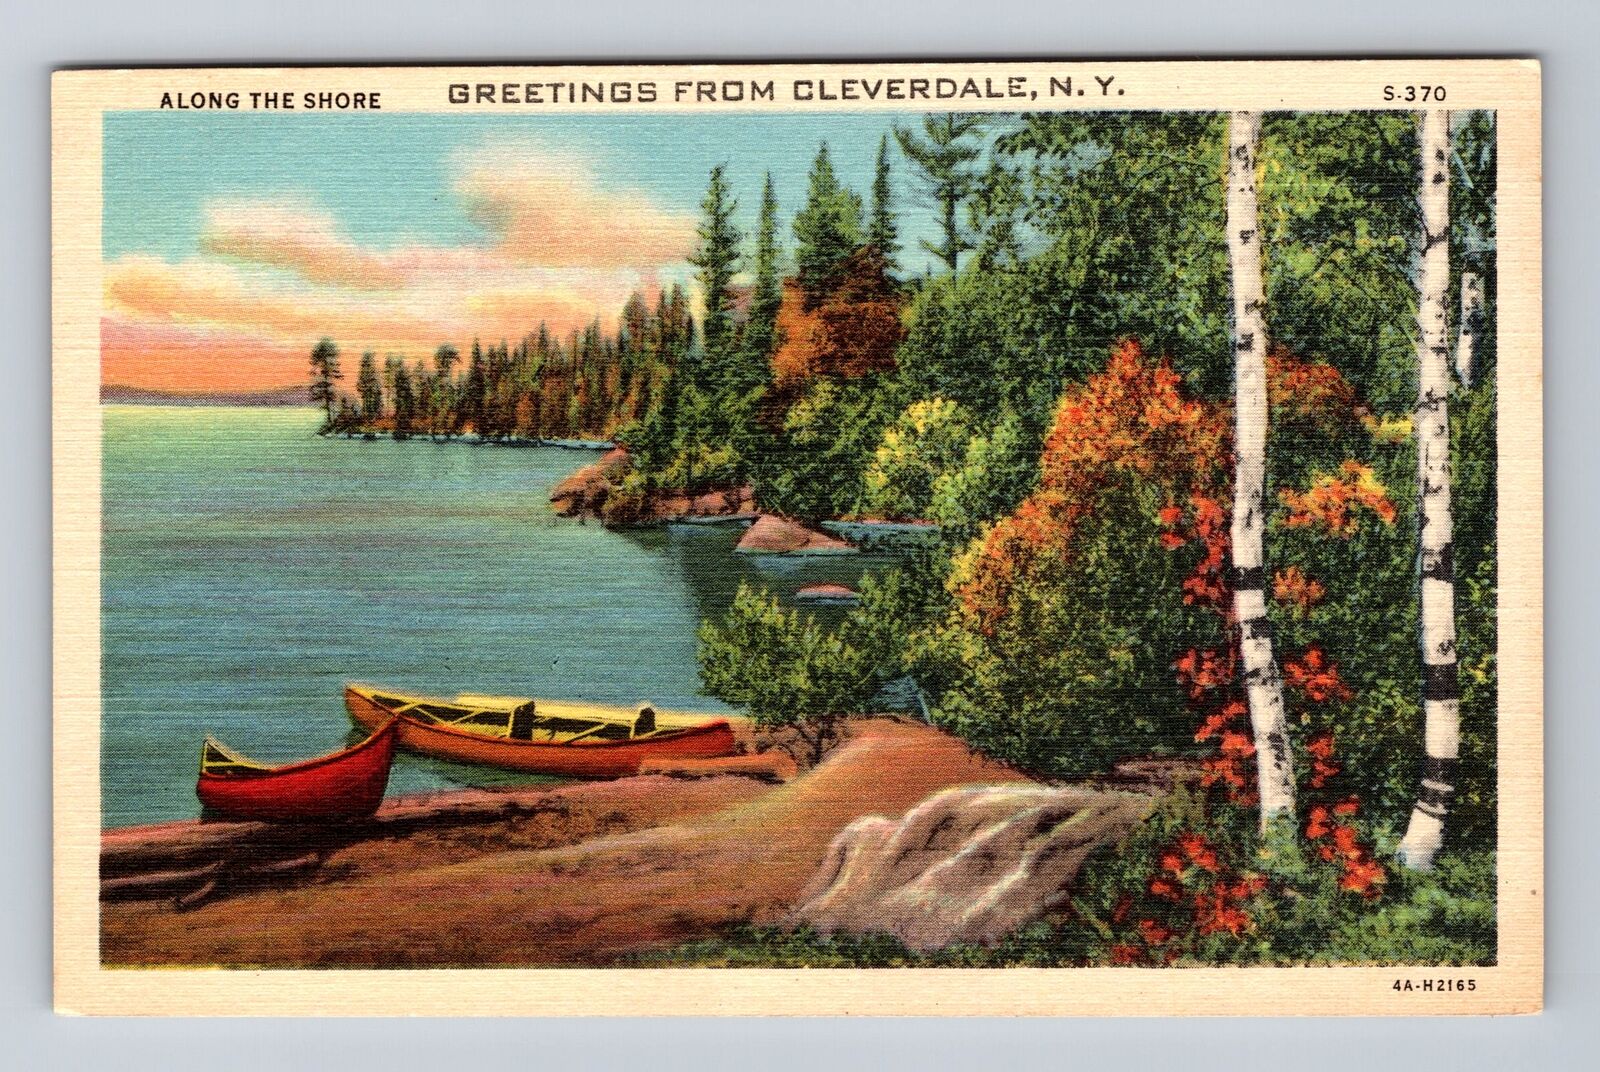 Cleverdale NY-New York, Scenic Greetings along the Shoreline, Vintage Postcard